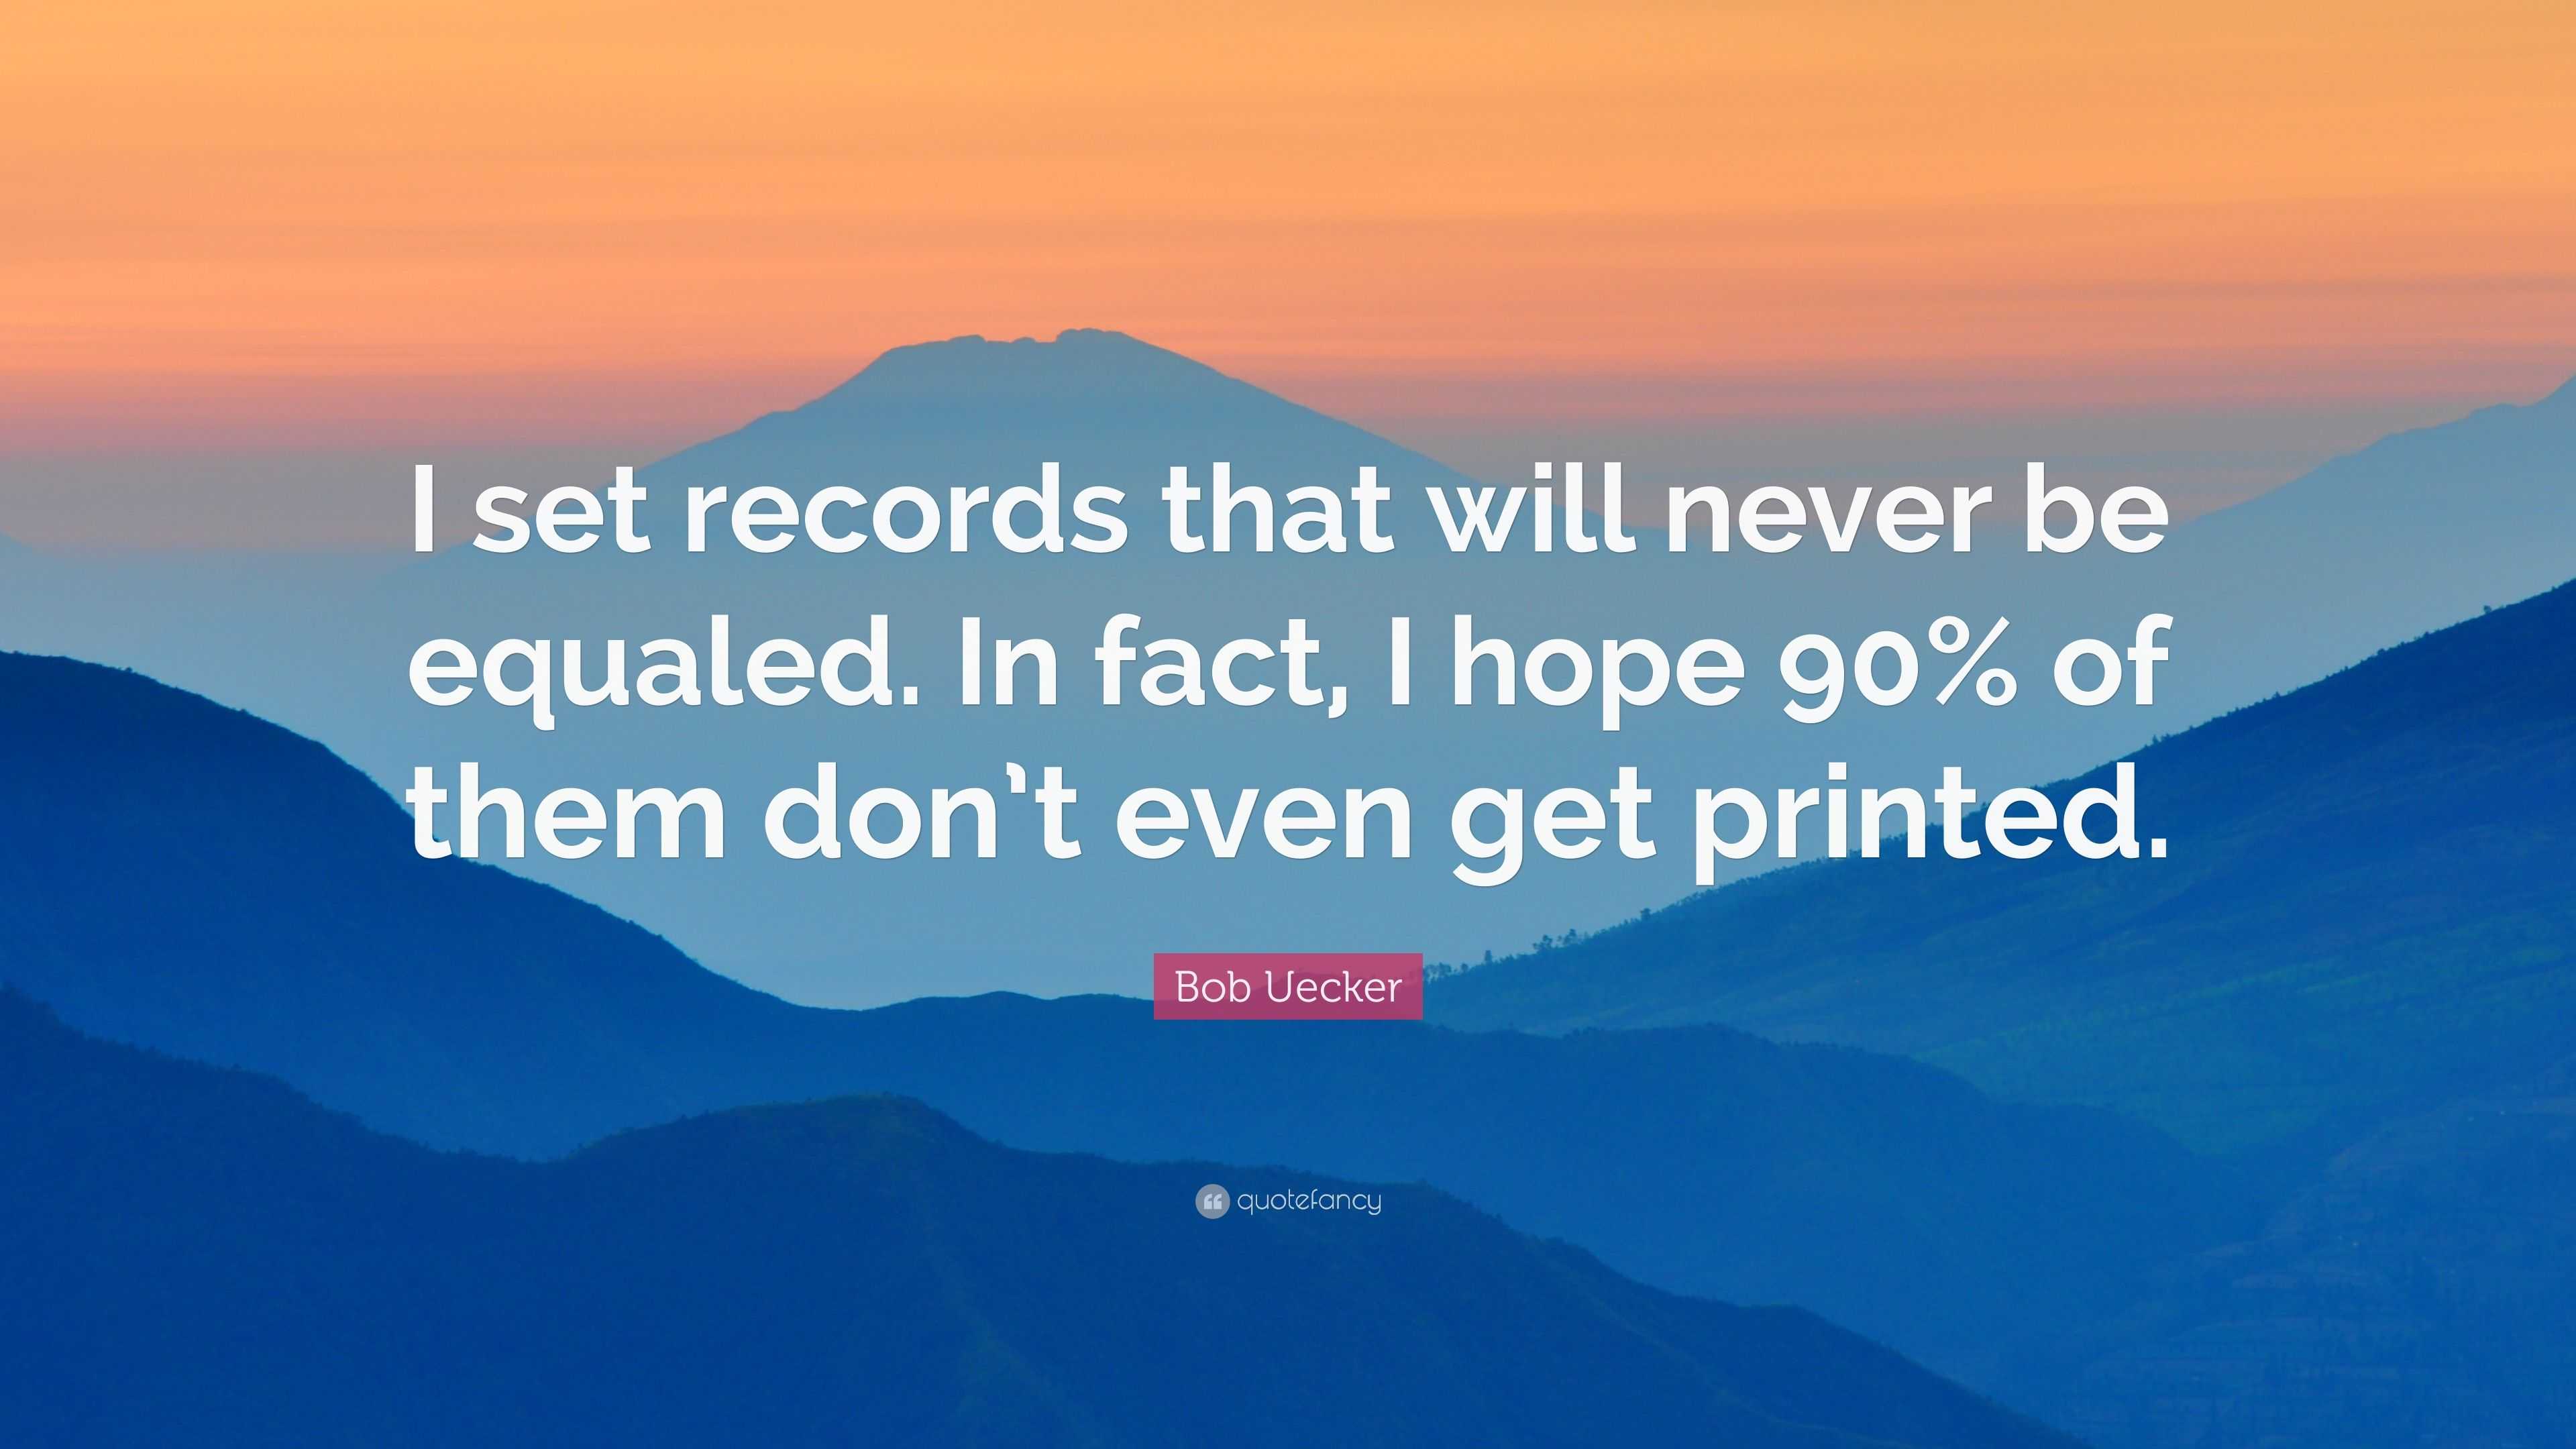 Bob Uecker Quote: “I set records that will never be equaled. In fact, I  hope 90